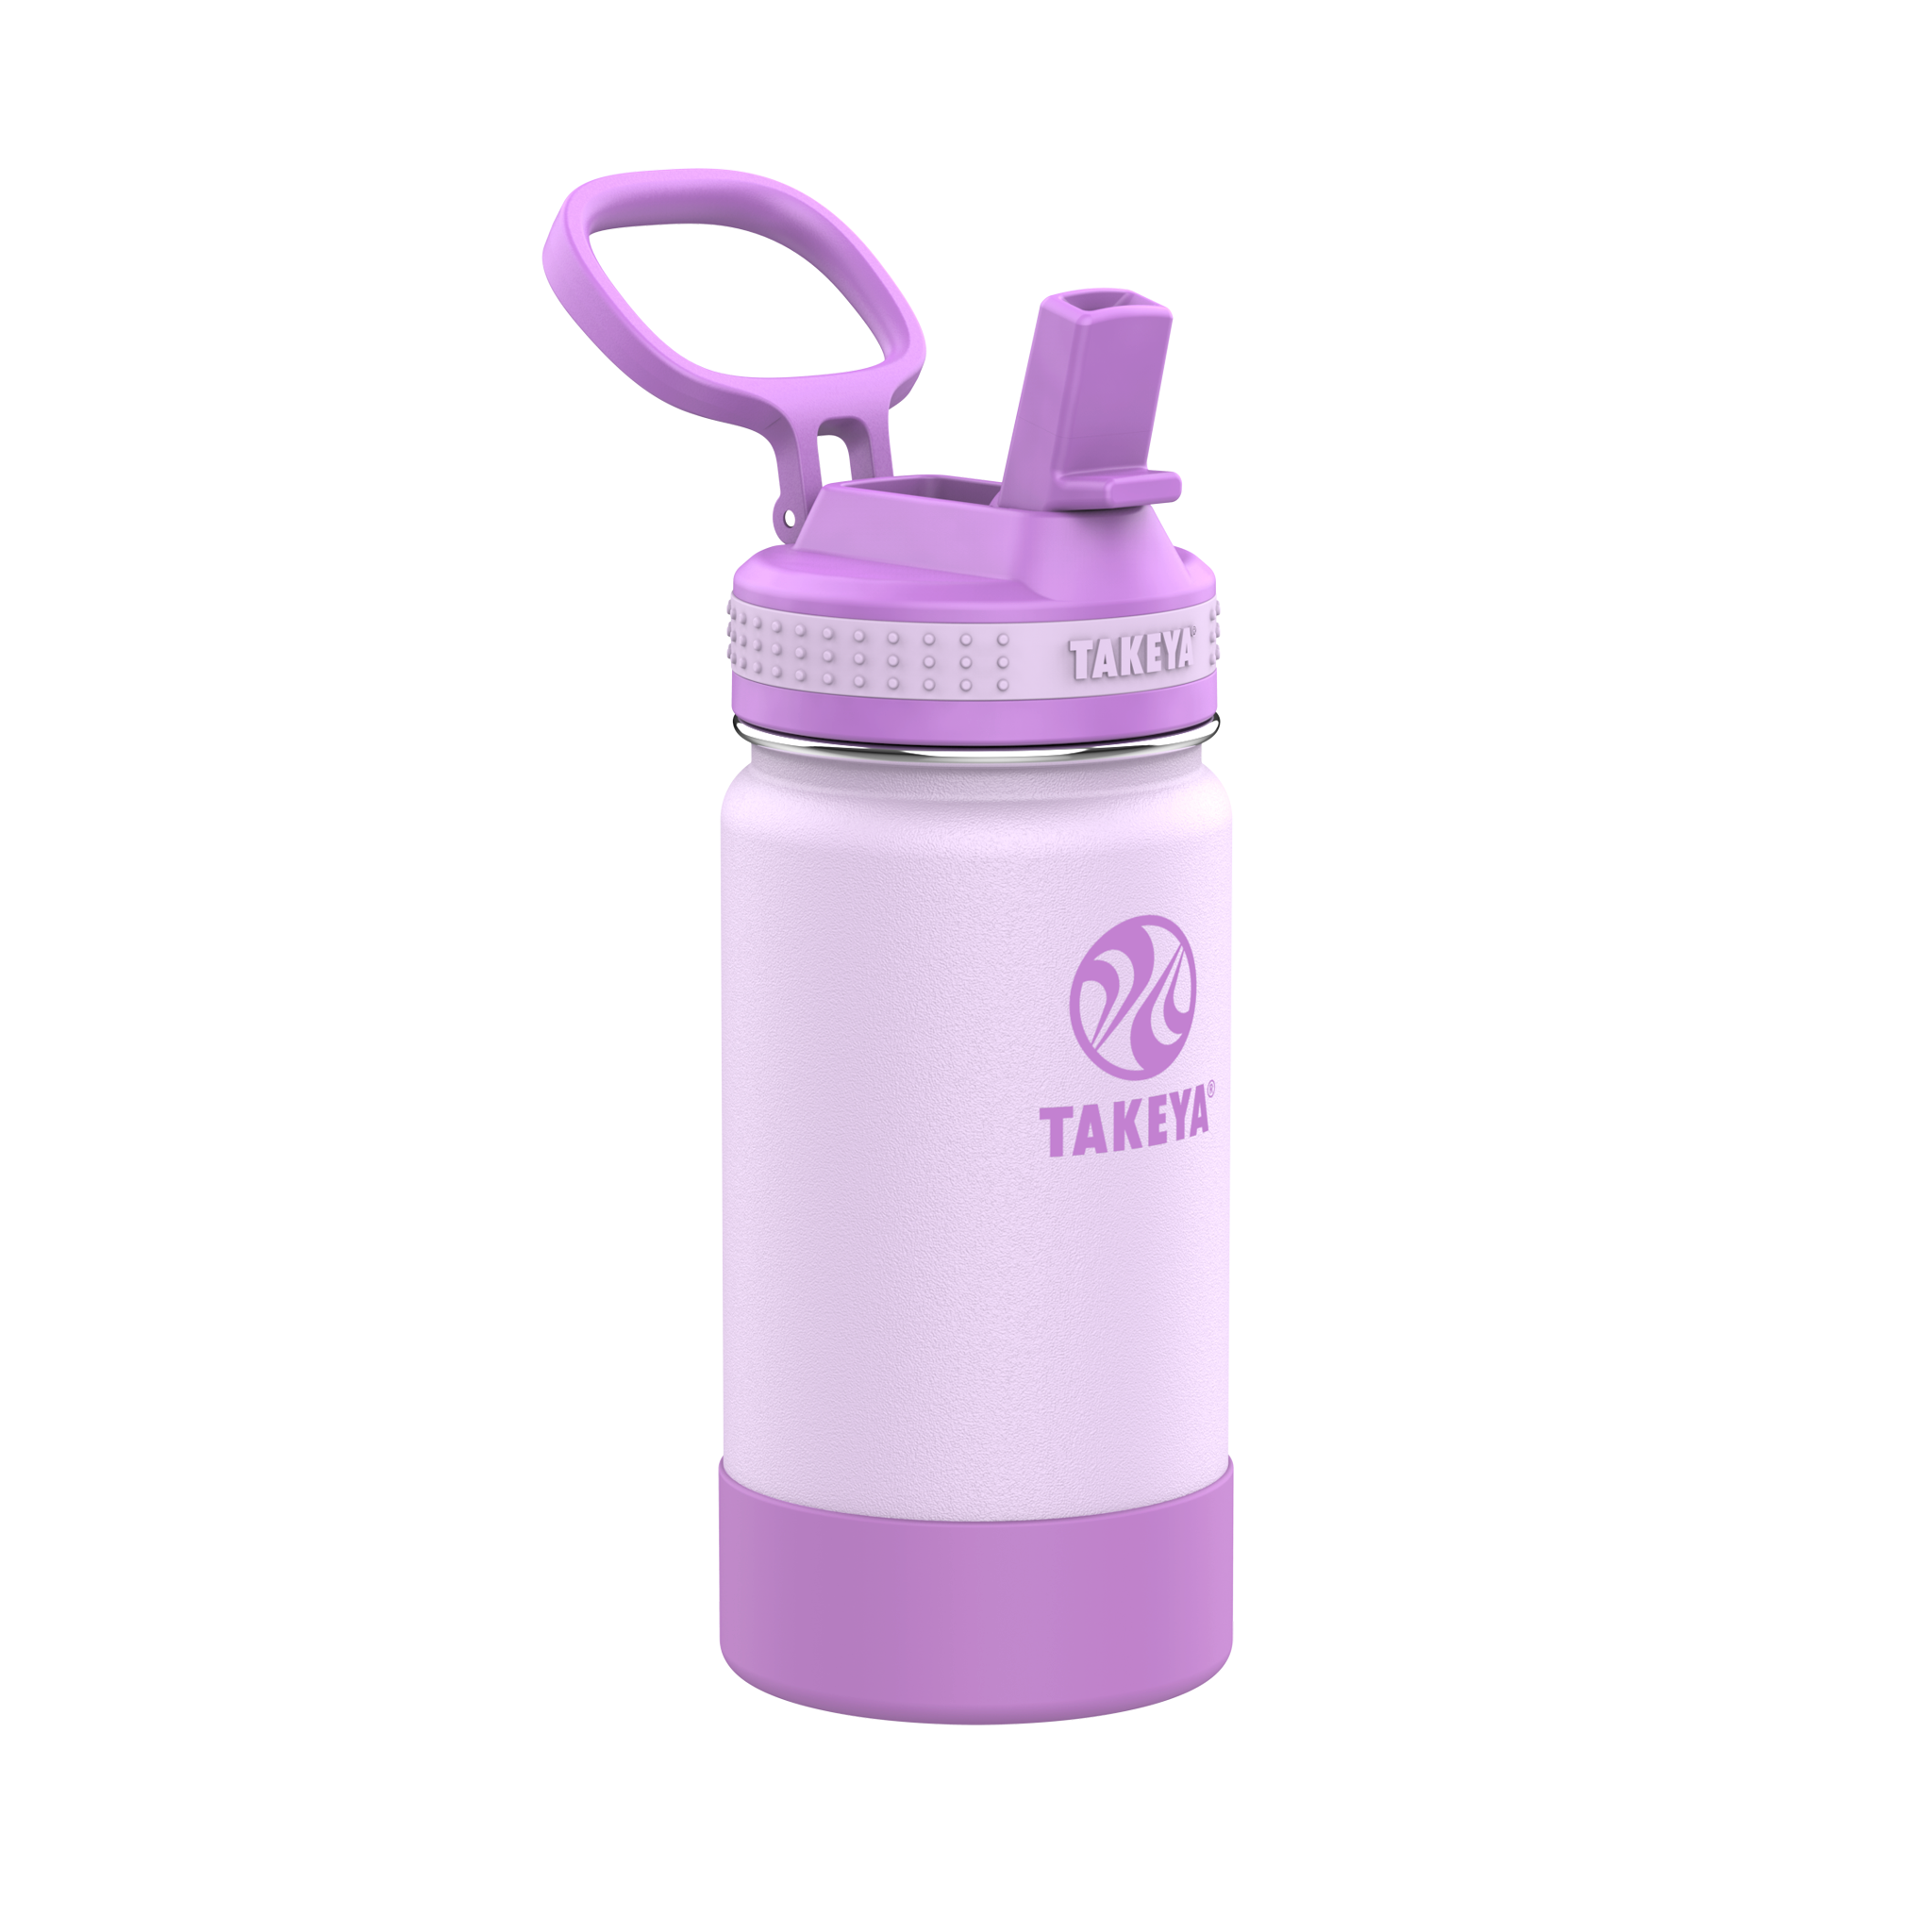 Takeya 32oz Actives Insulated Stainless Steel Water Bottle with Spout Lid - Lilac